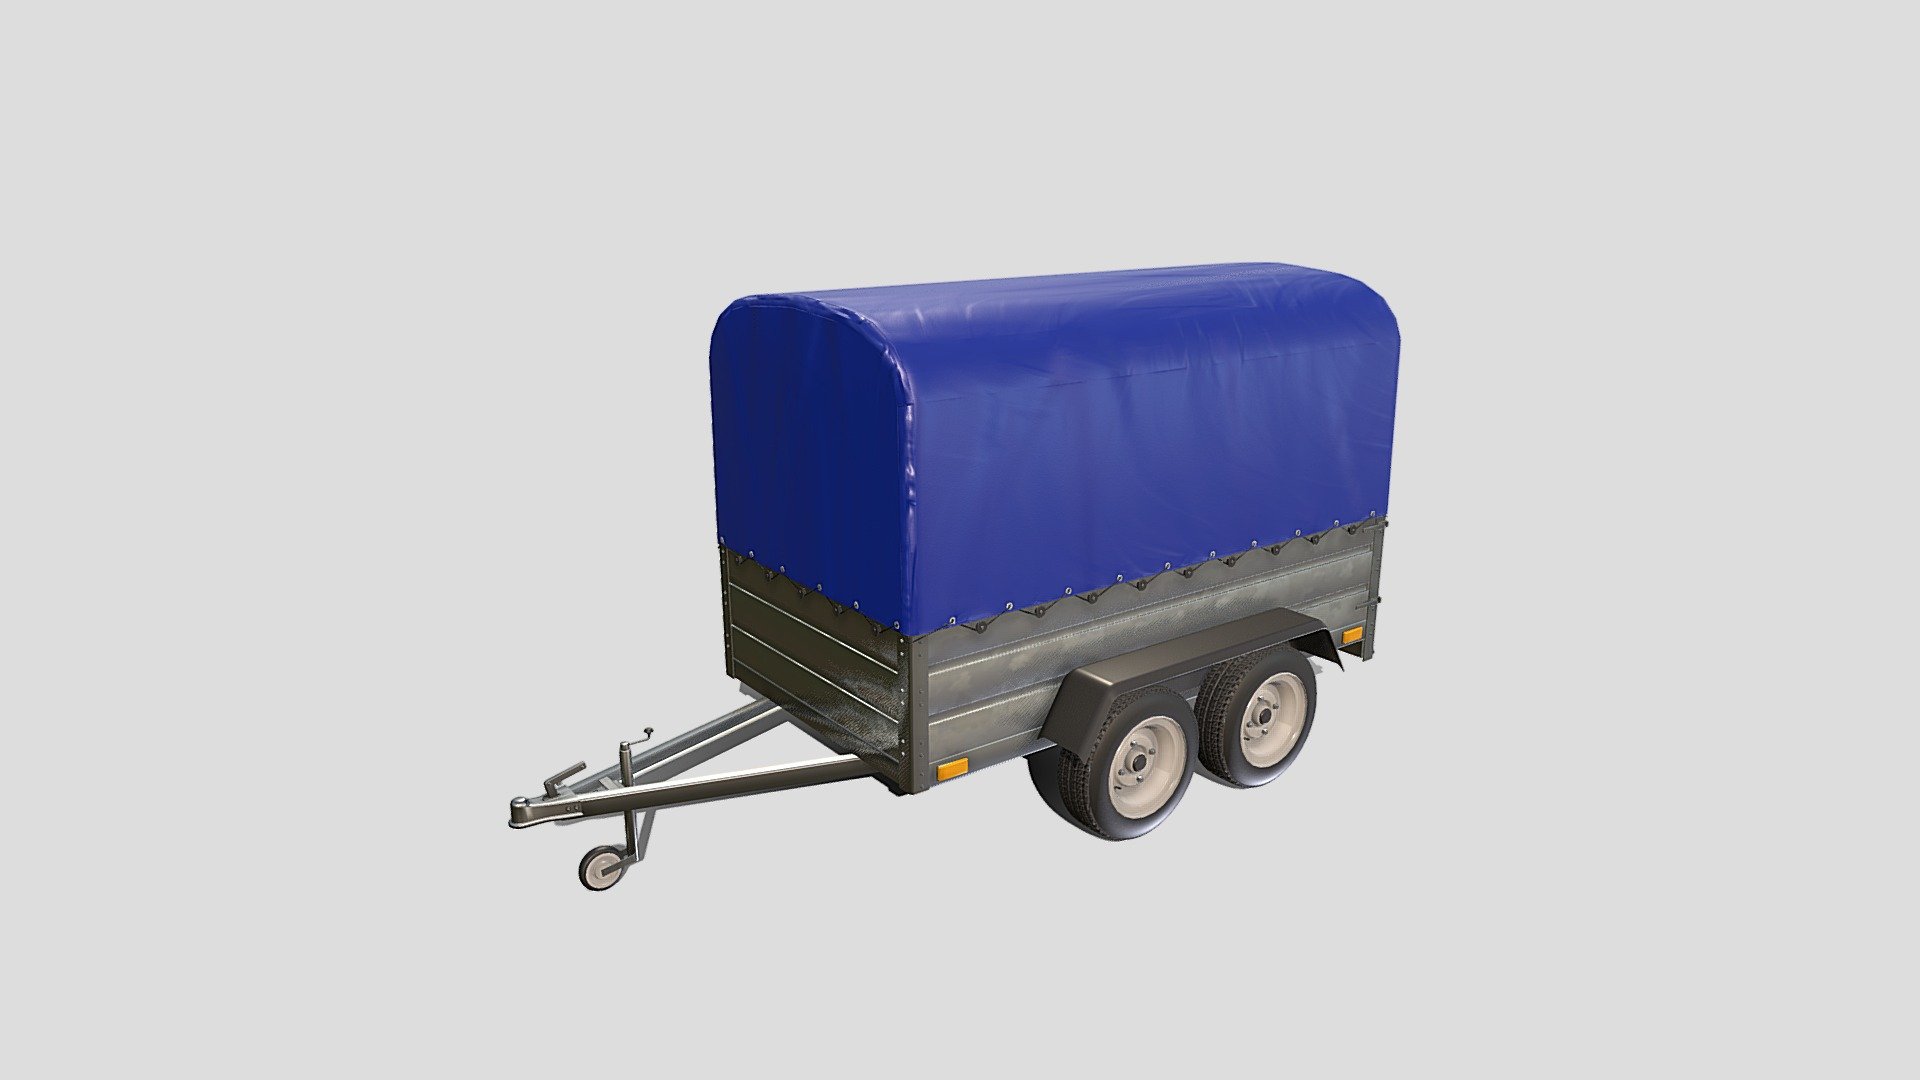 Cargo Trailer 3d model rendered with Cycles in Blender, as per seen on attached images. 

File formats:
-.blend, rendered with cycles, as seen in the images;
-.obj, with materials applied;
-.dae, with materials applied;
-.fbx, with materials applied;
-.stl;

Files come named appropriately and split by file format.

3D Software:
The 3D model was originally created in Blender 3.1 and rendered with Cycles.

Materials and textures:
The models have materials applied in all formats, and are ready to import and render.
Materials are image based using PBR, the model comes with three sets of 2k png image textures.

The high resolution of the textures has been kept to provide best quality, if however the images are too big for your project, the textures can be easily scaled down in order to fit a certain requirement. Please feel free to contact me if needed!

General:
The models are built mostly out of quads.

For any problems please feel free to contact me.

Don't forget to rate and enjoy! - Cargo Trailer v5 - Buy Royalty Free 3D model by dragosburian 3d model